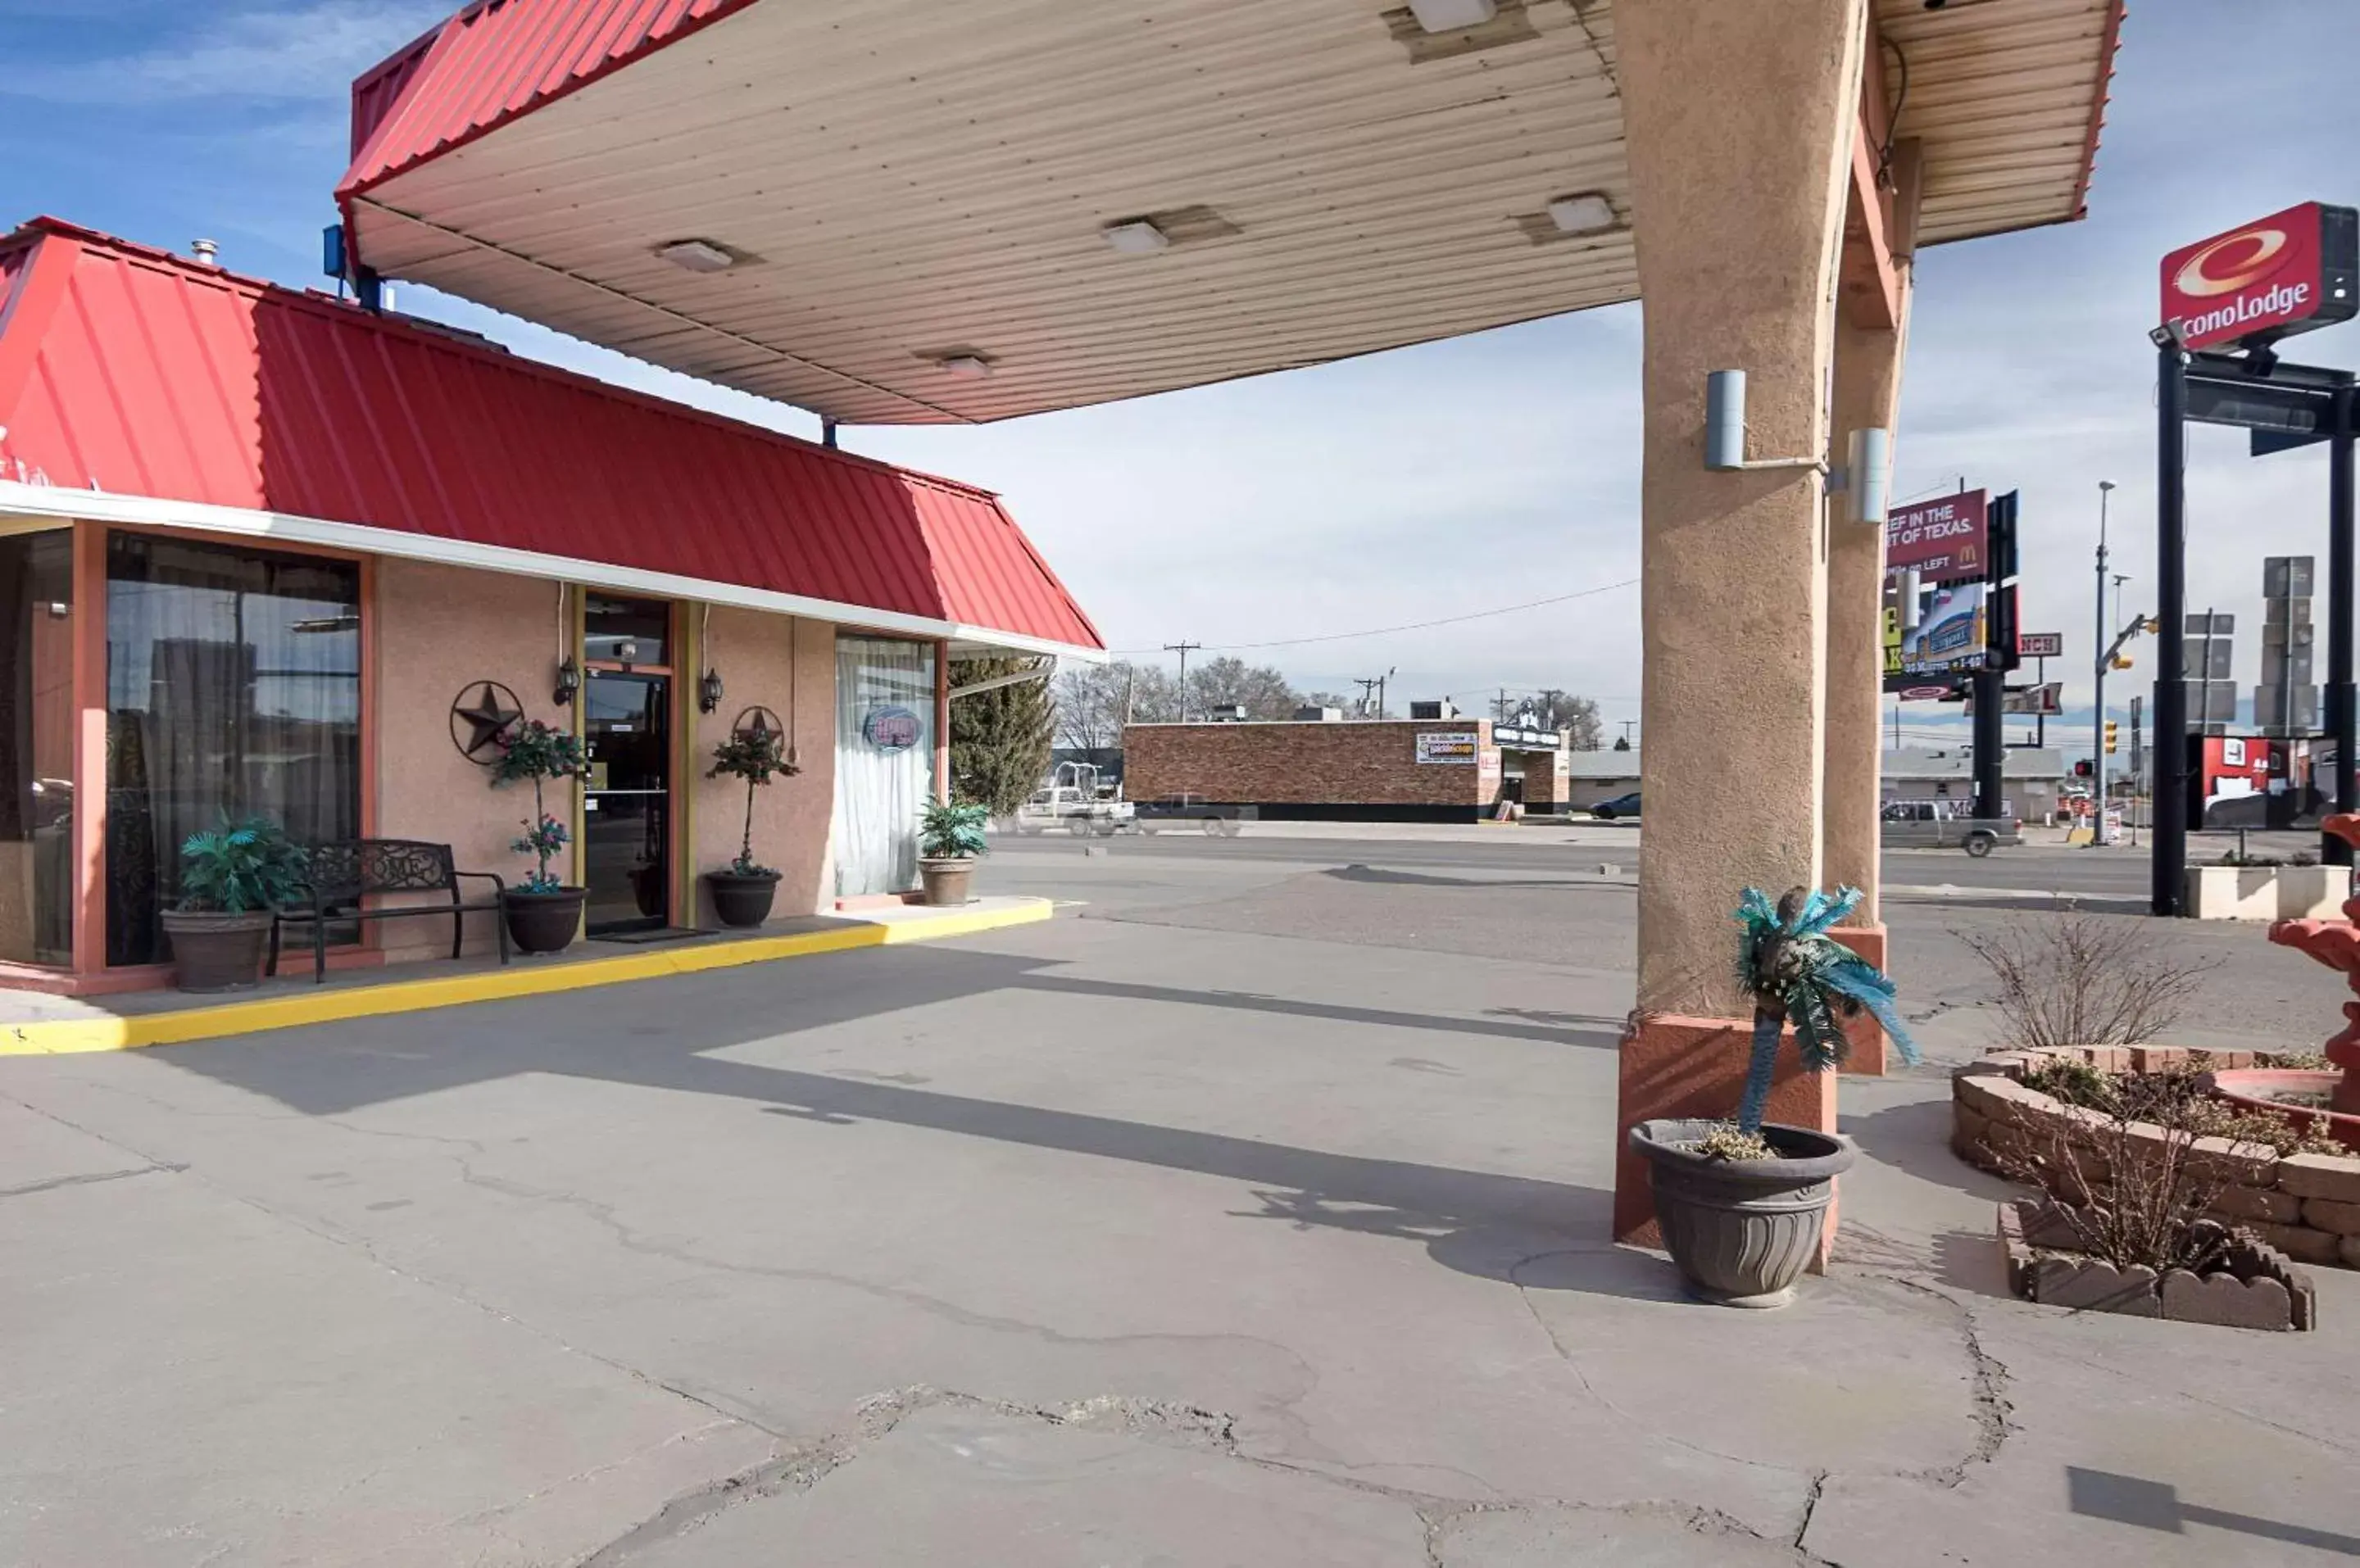 Property building in Econo Lodge Dalhart Hwy 54 - Hwy 287